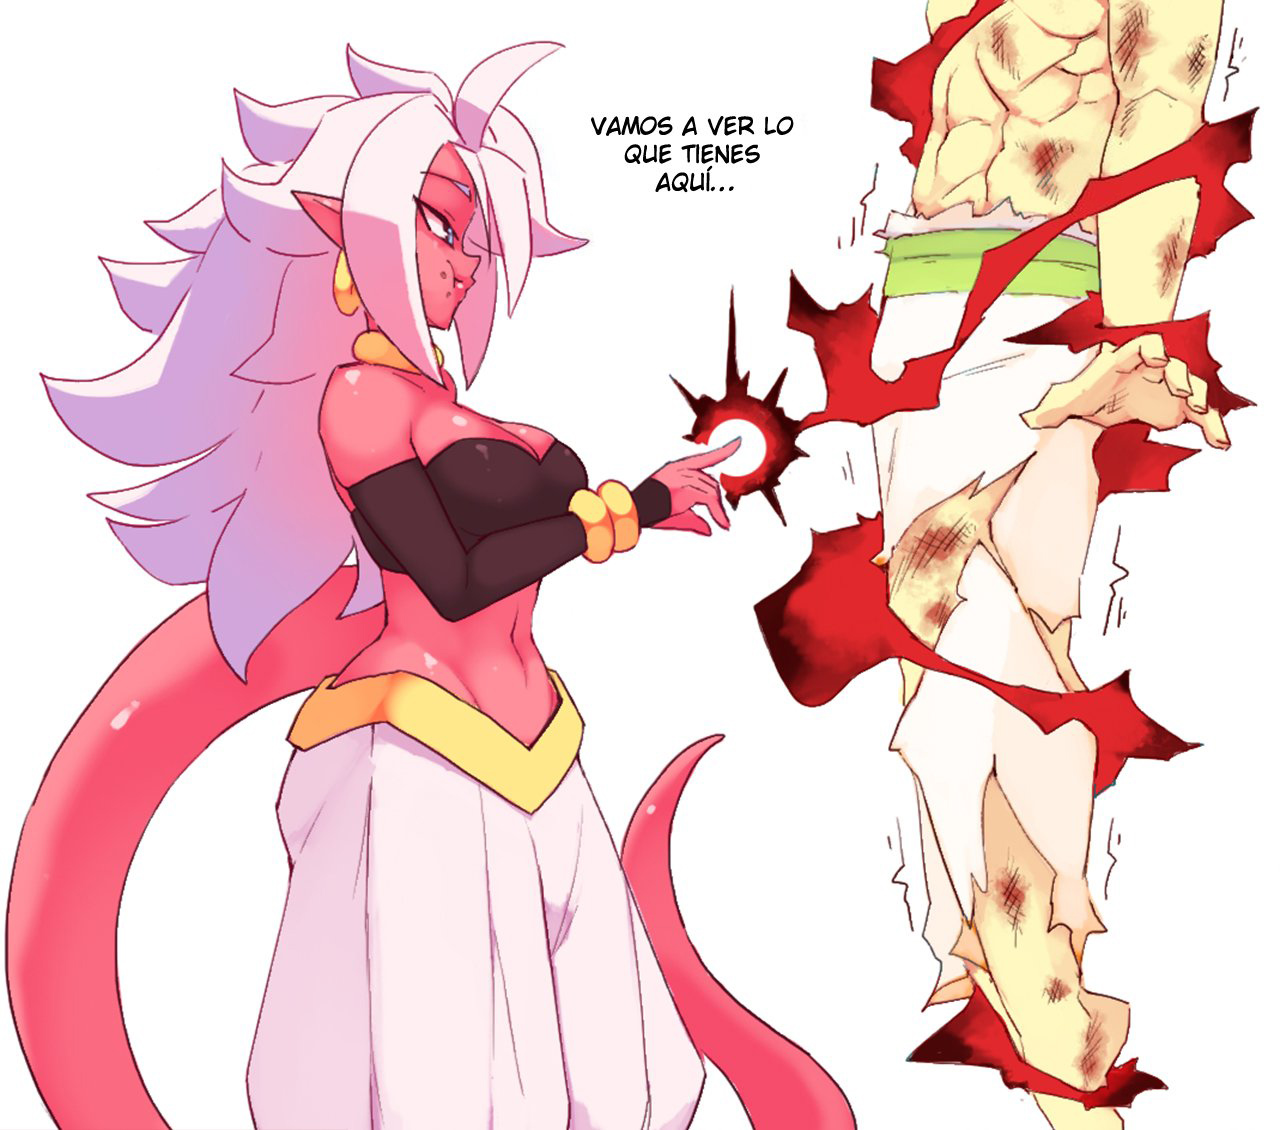 ANDROID 21s Sweet Treat